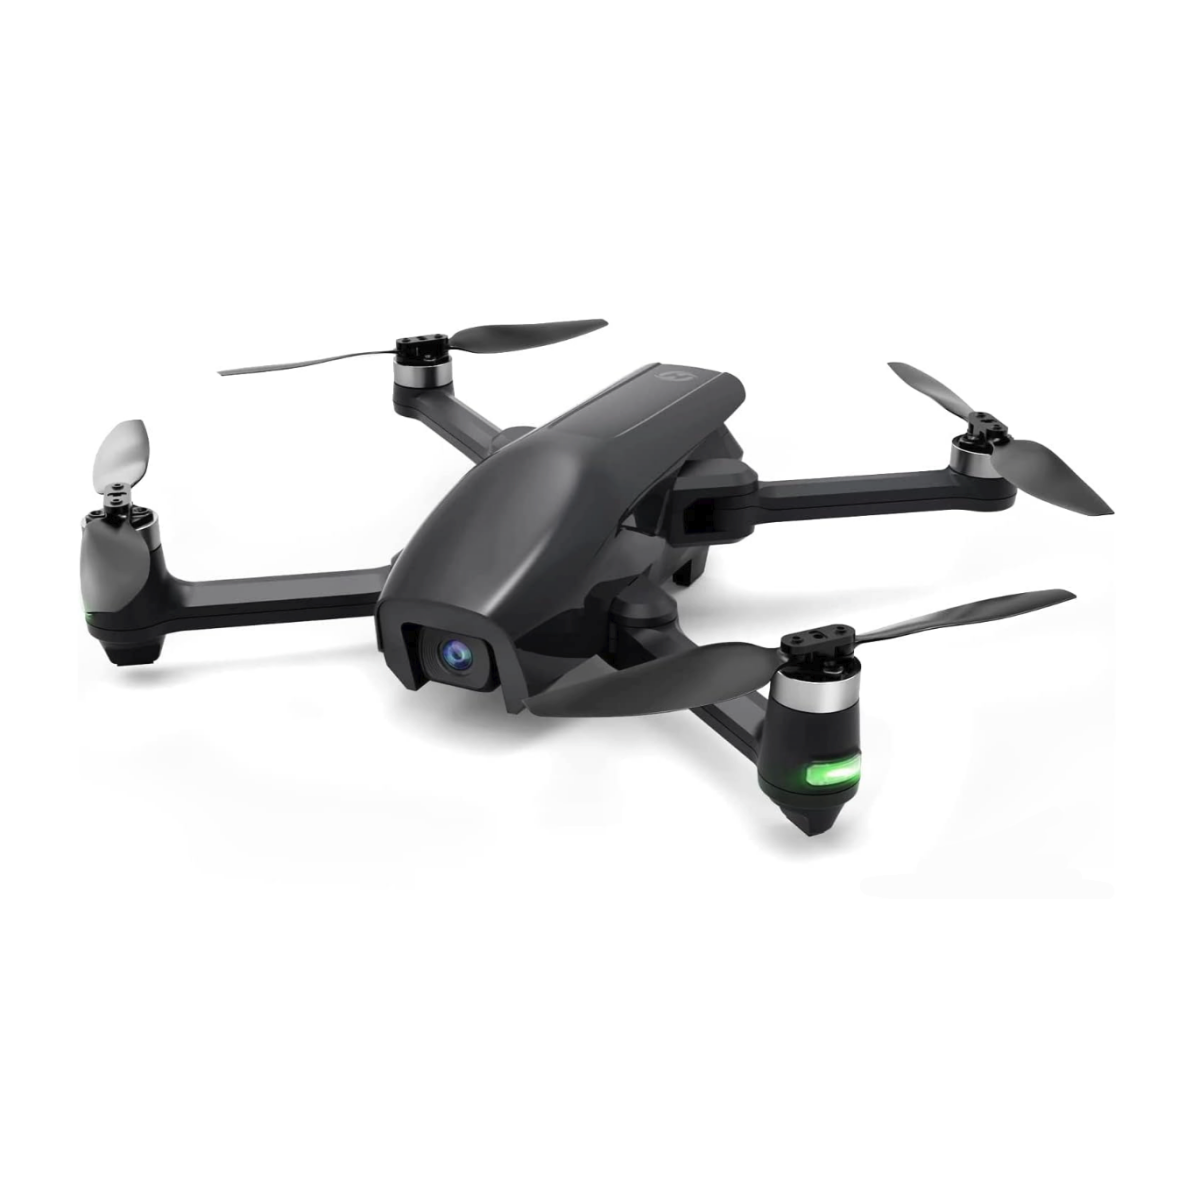 A Holy Stone HS710 drone